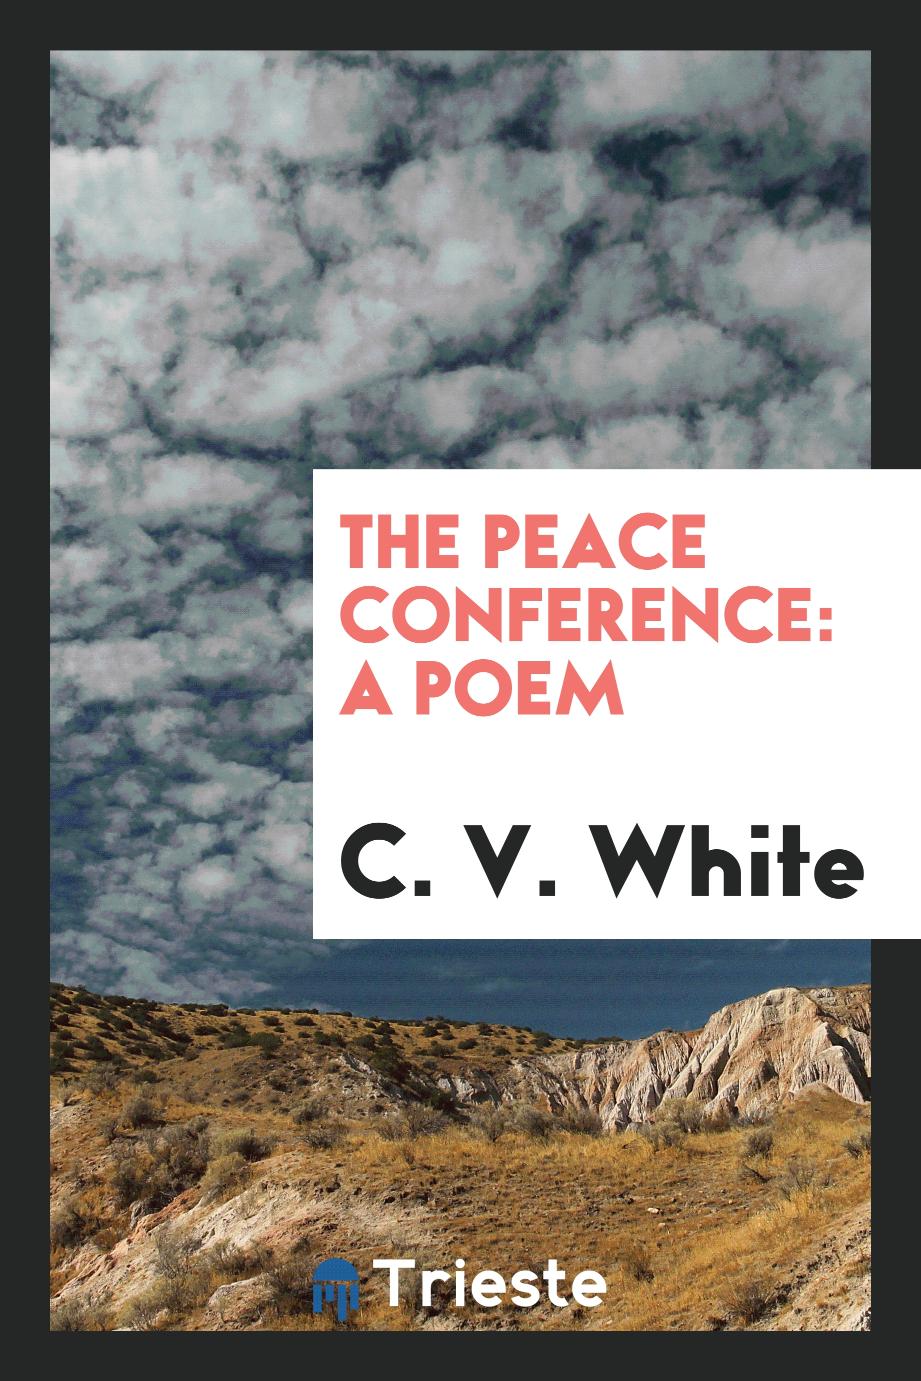 The Peace Conference: A Poem